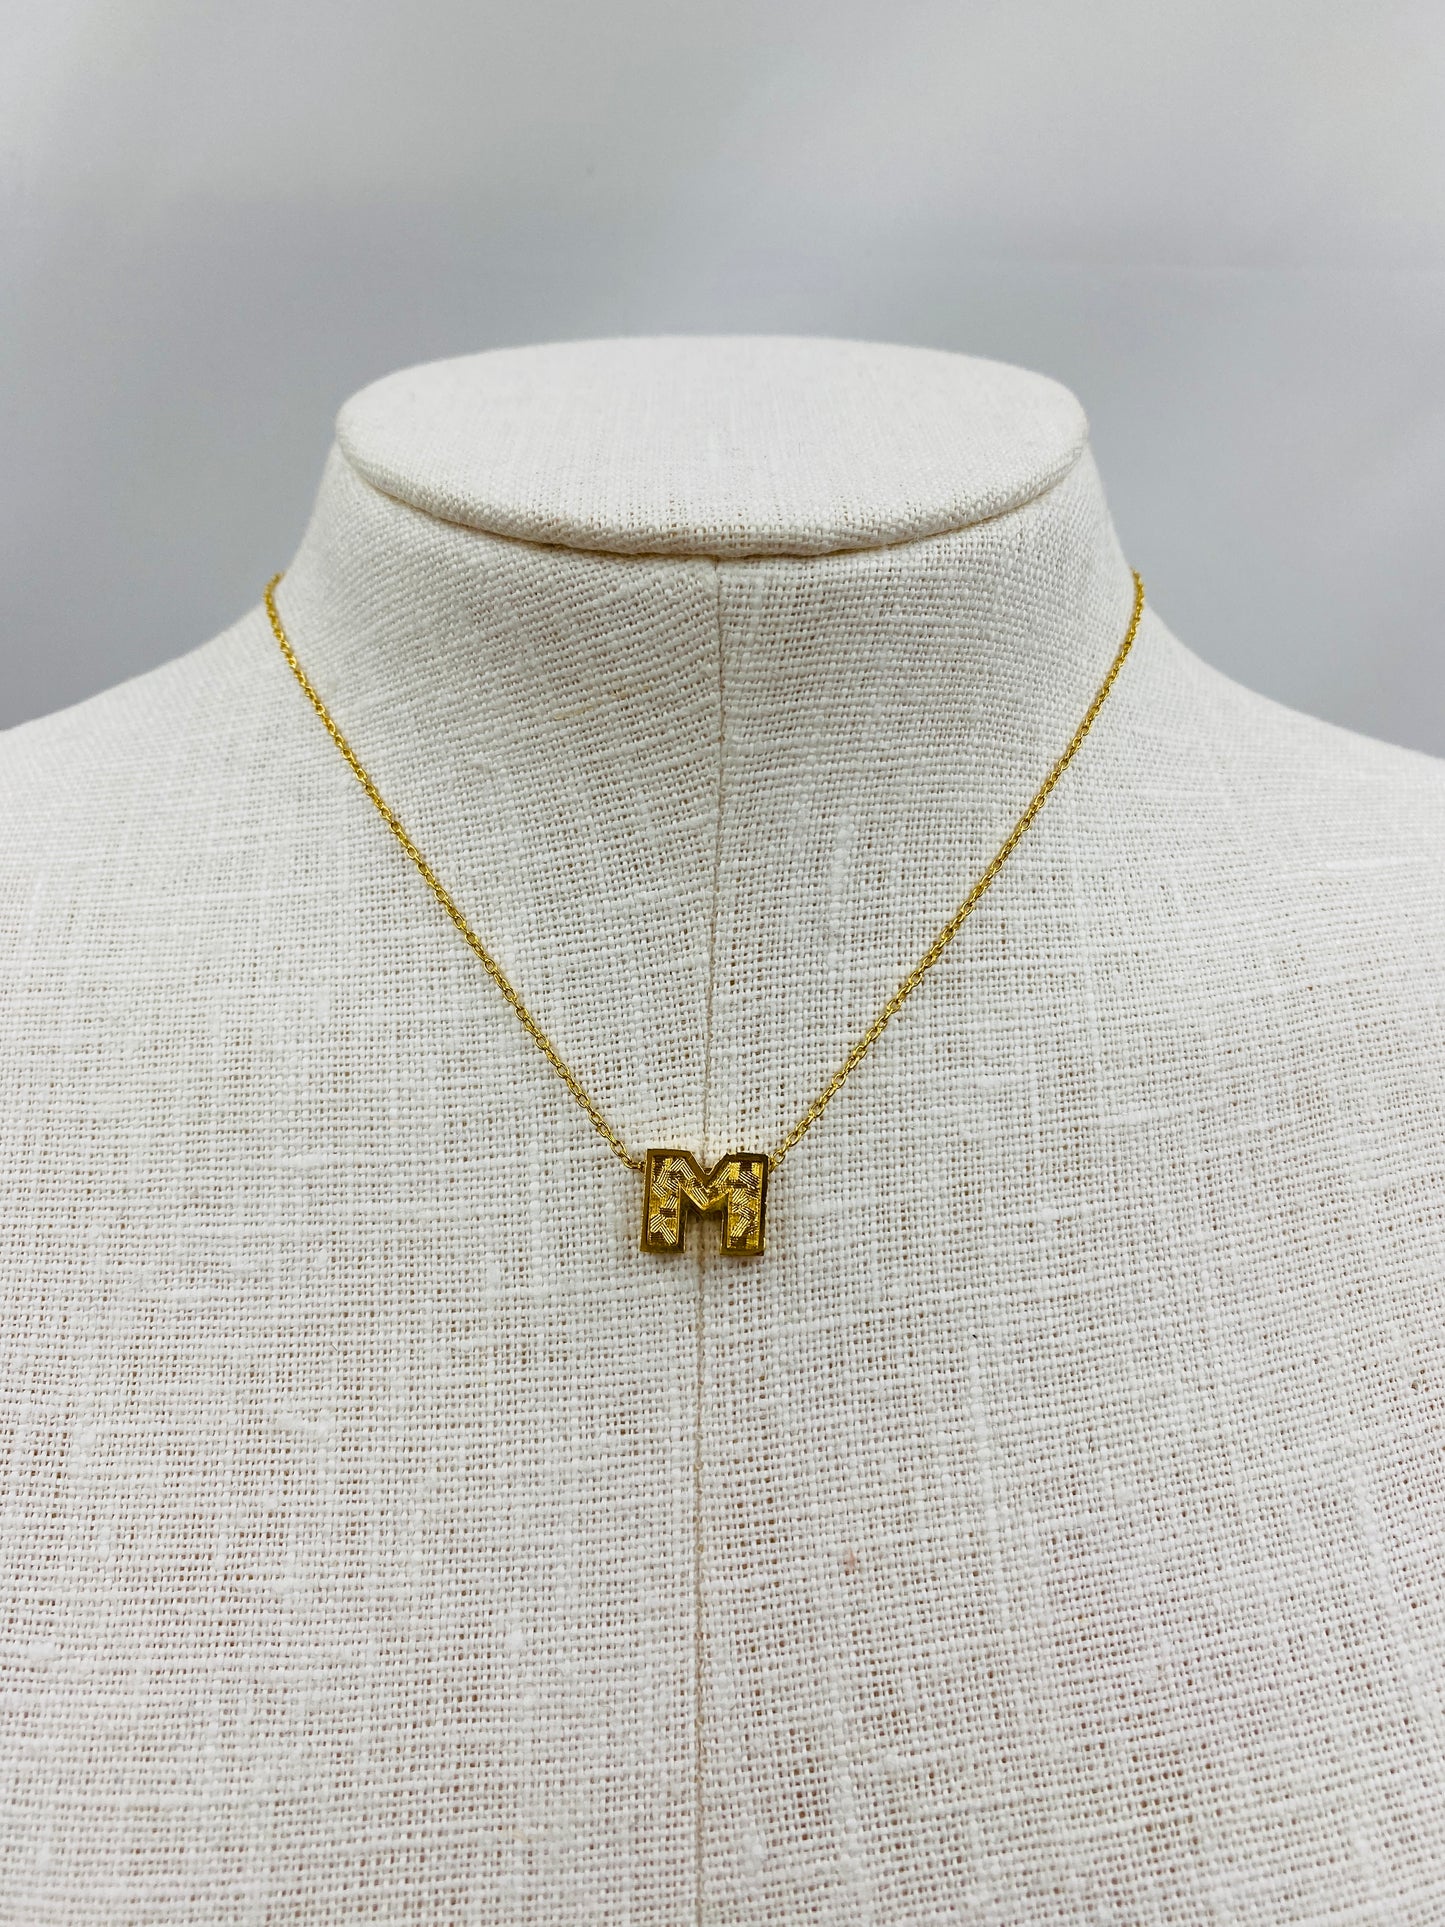 Vintage D'Orlan Goldtone 'M' Initial Chain Necklace